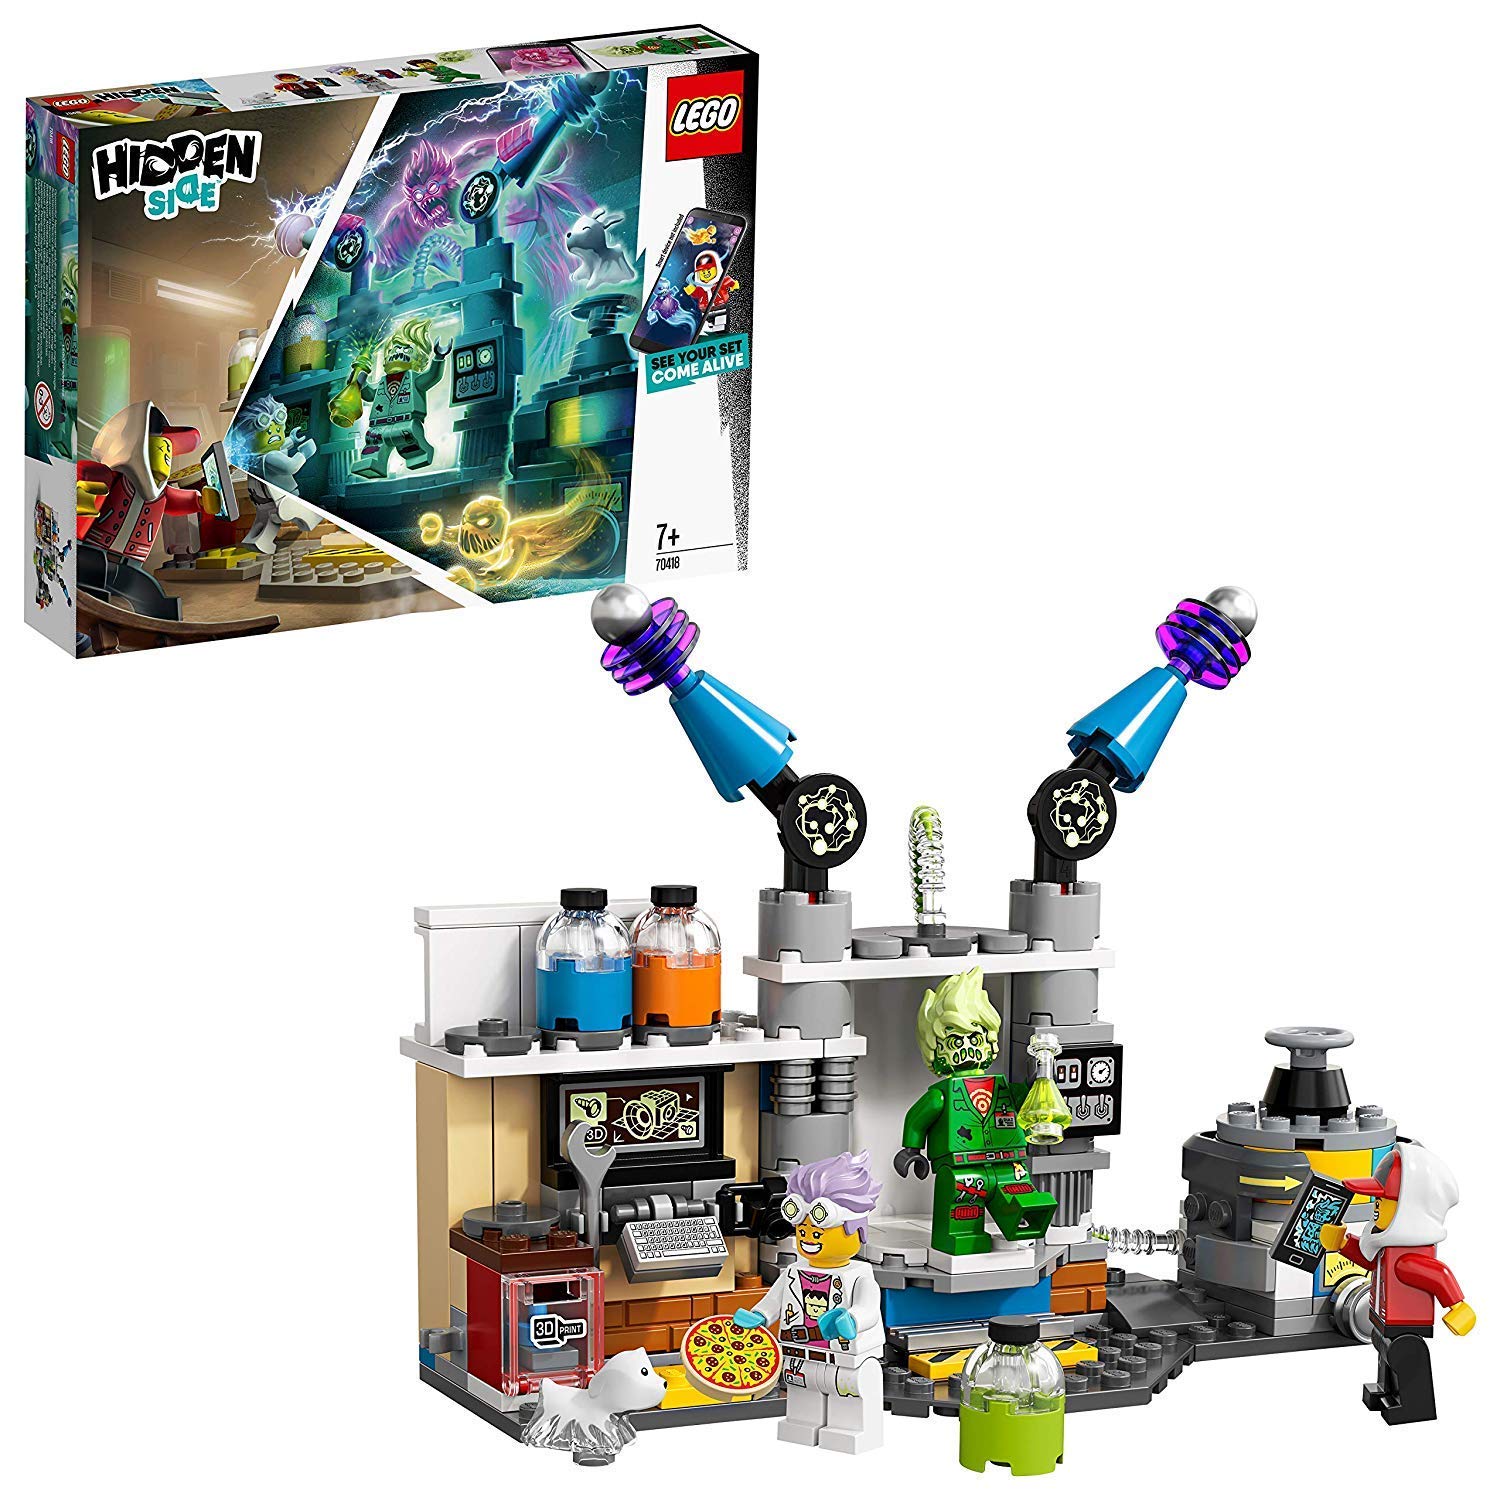 Lego 70418 Hidden Side J.B. S Ghost Lab Toy For Children With Augmented Re